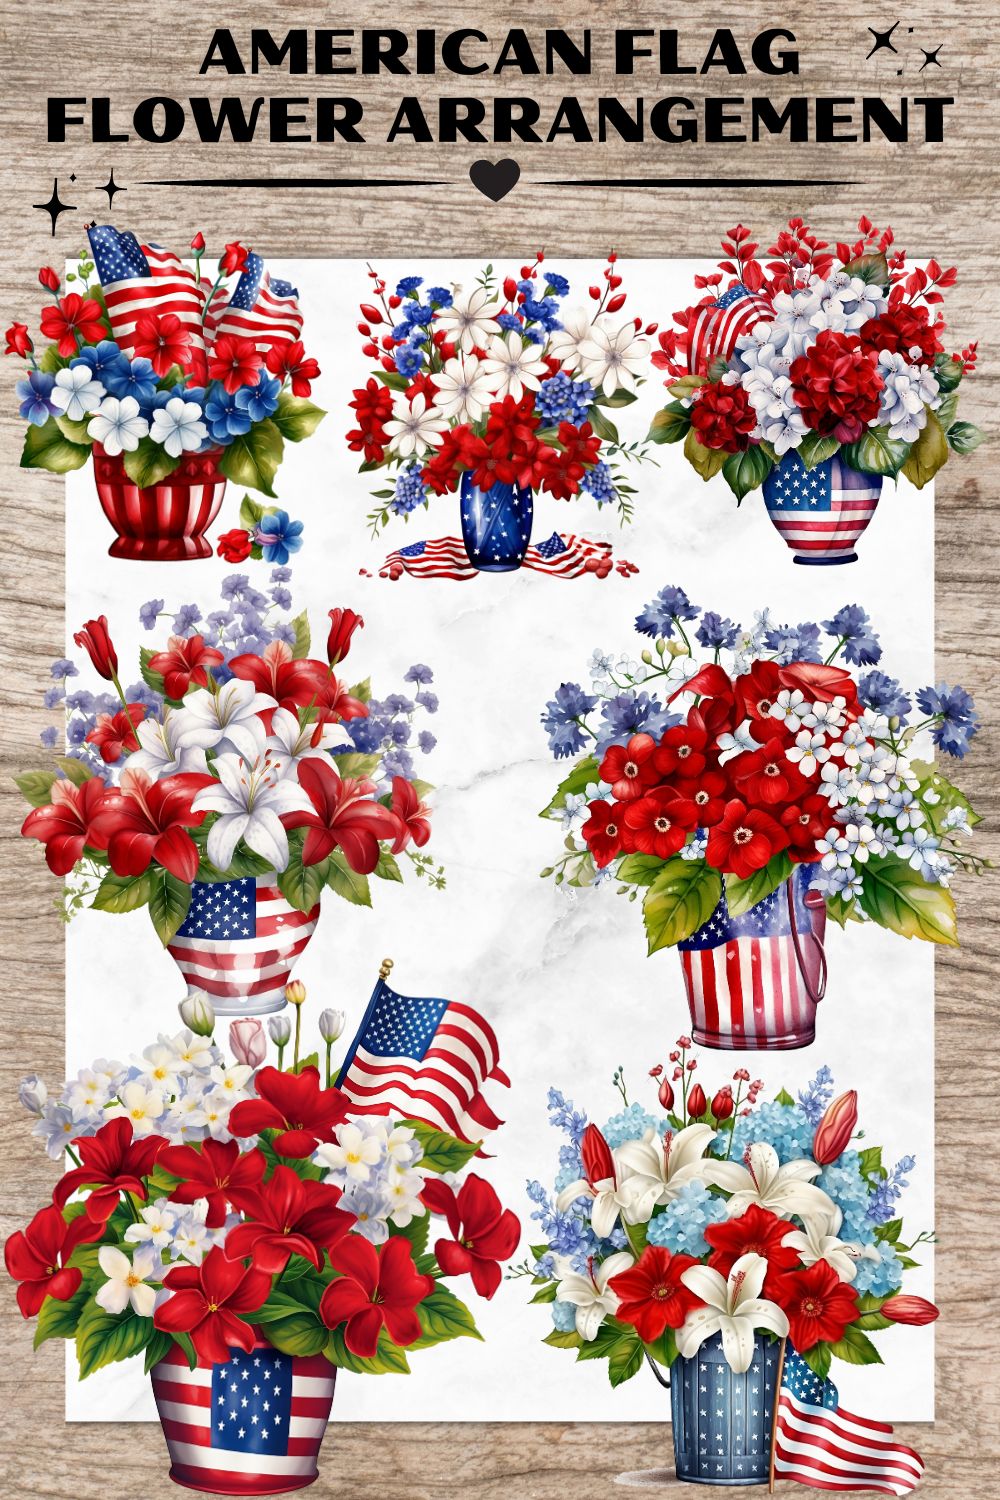 8 American Flag 4th July Flower Arrangement PNG, Watercolor Clipart, 4th of July Flowers, Transparent PNG, Digital Paper Craft, Watercolor Clipart for Scrapbook, Invitation, Wall Art, T-Shirt Design pinterest preview image.